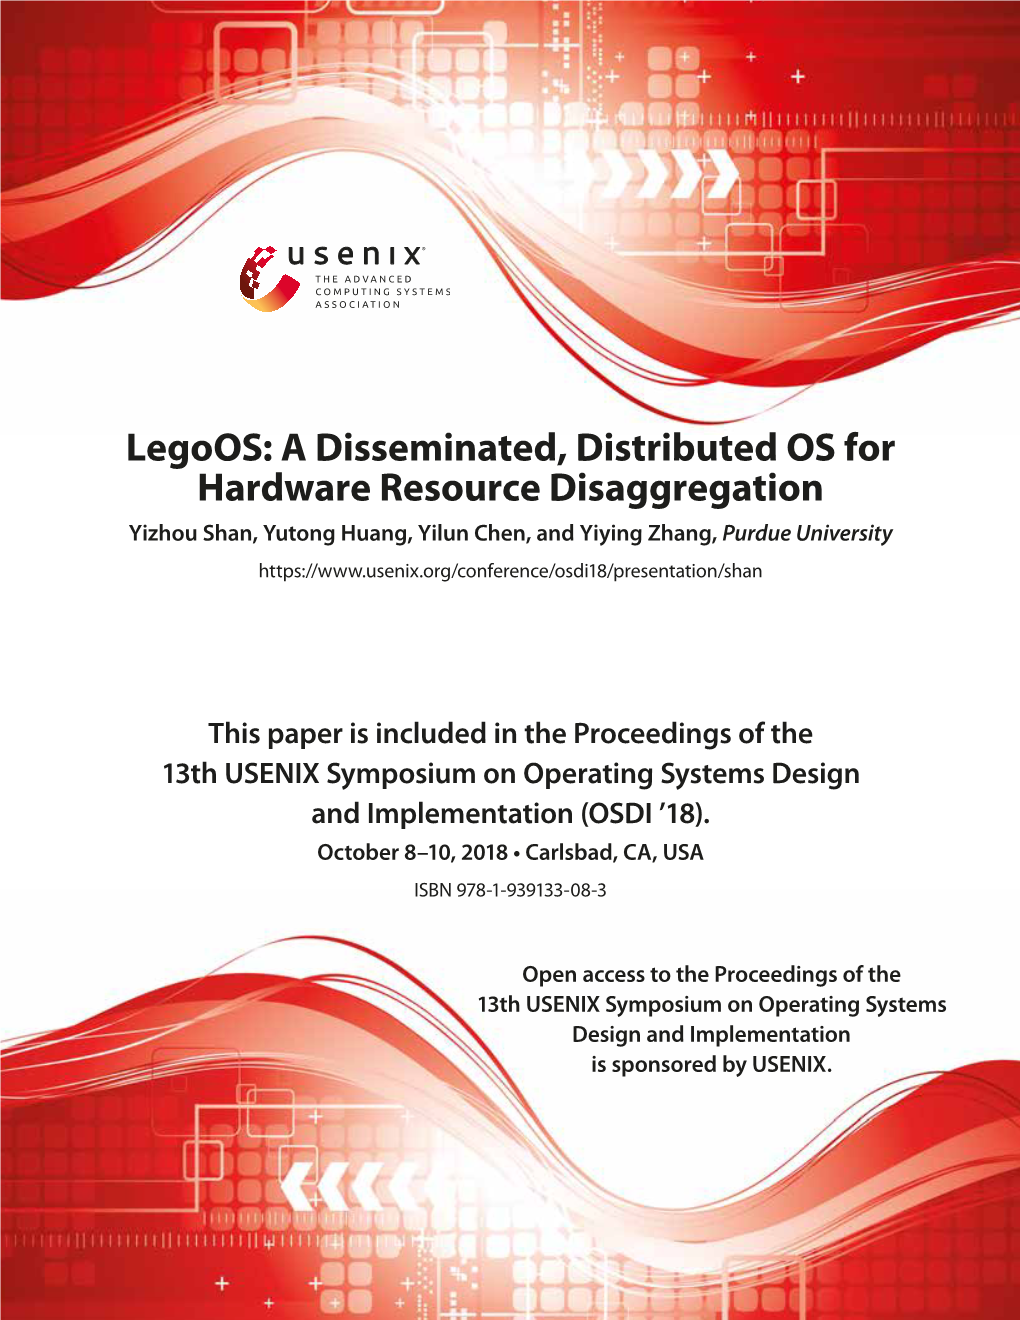 Legoos: a Disseminated, Distributed OS for Hardware Resource